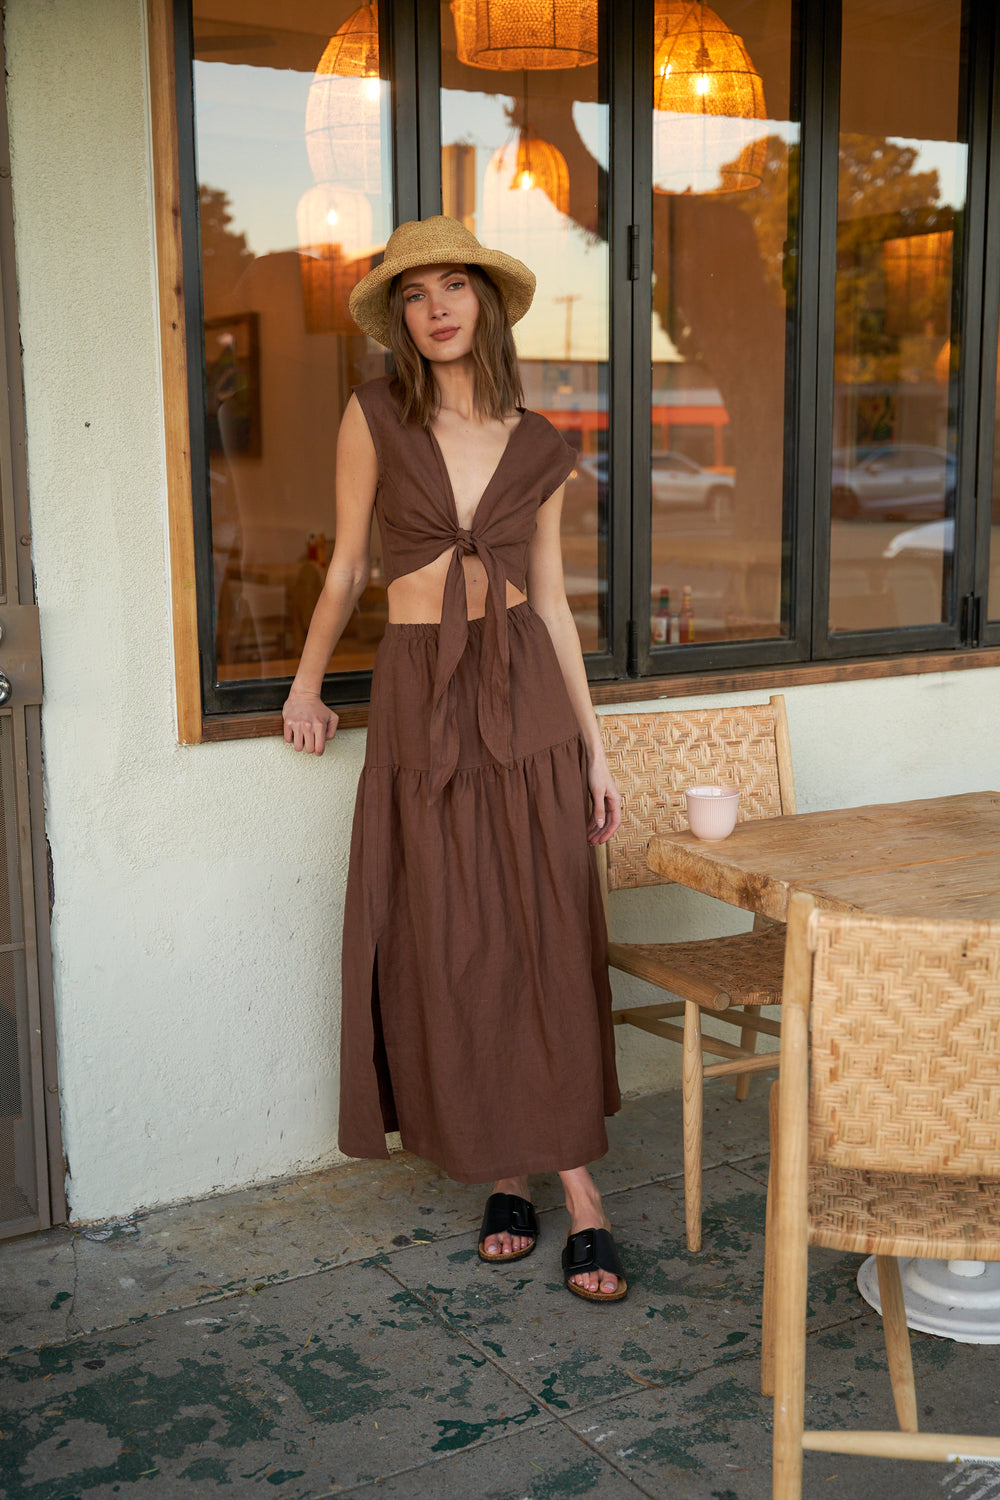 Millie Skirt/Dress in Chocolate - Whimsy & Row